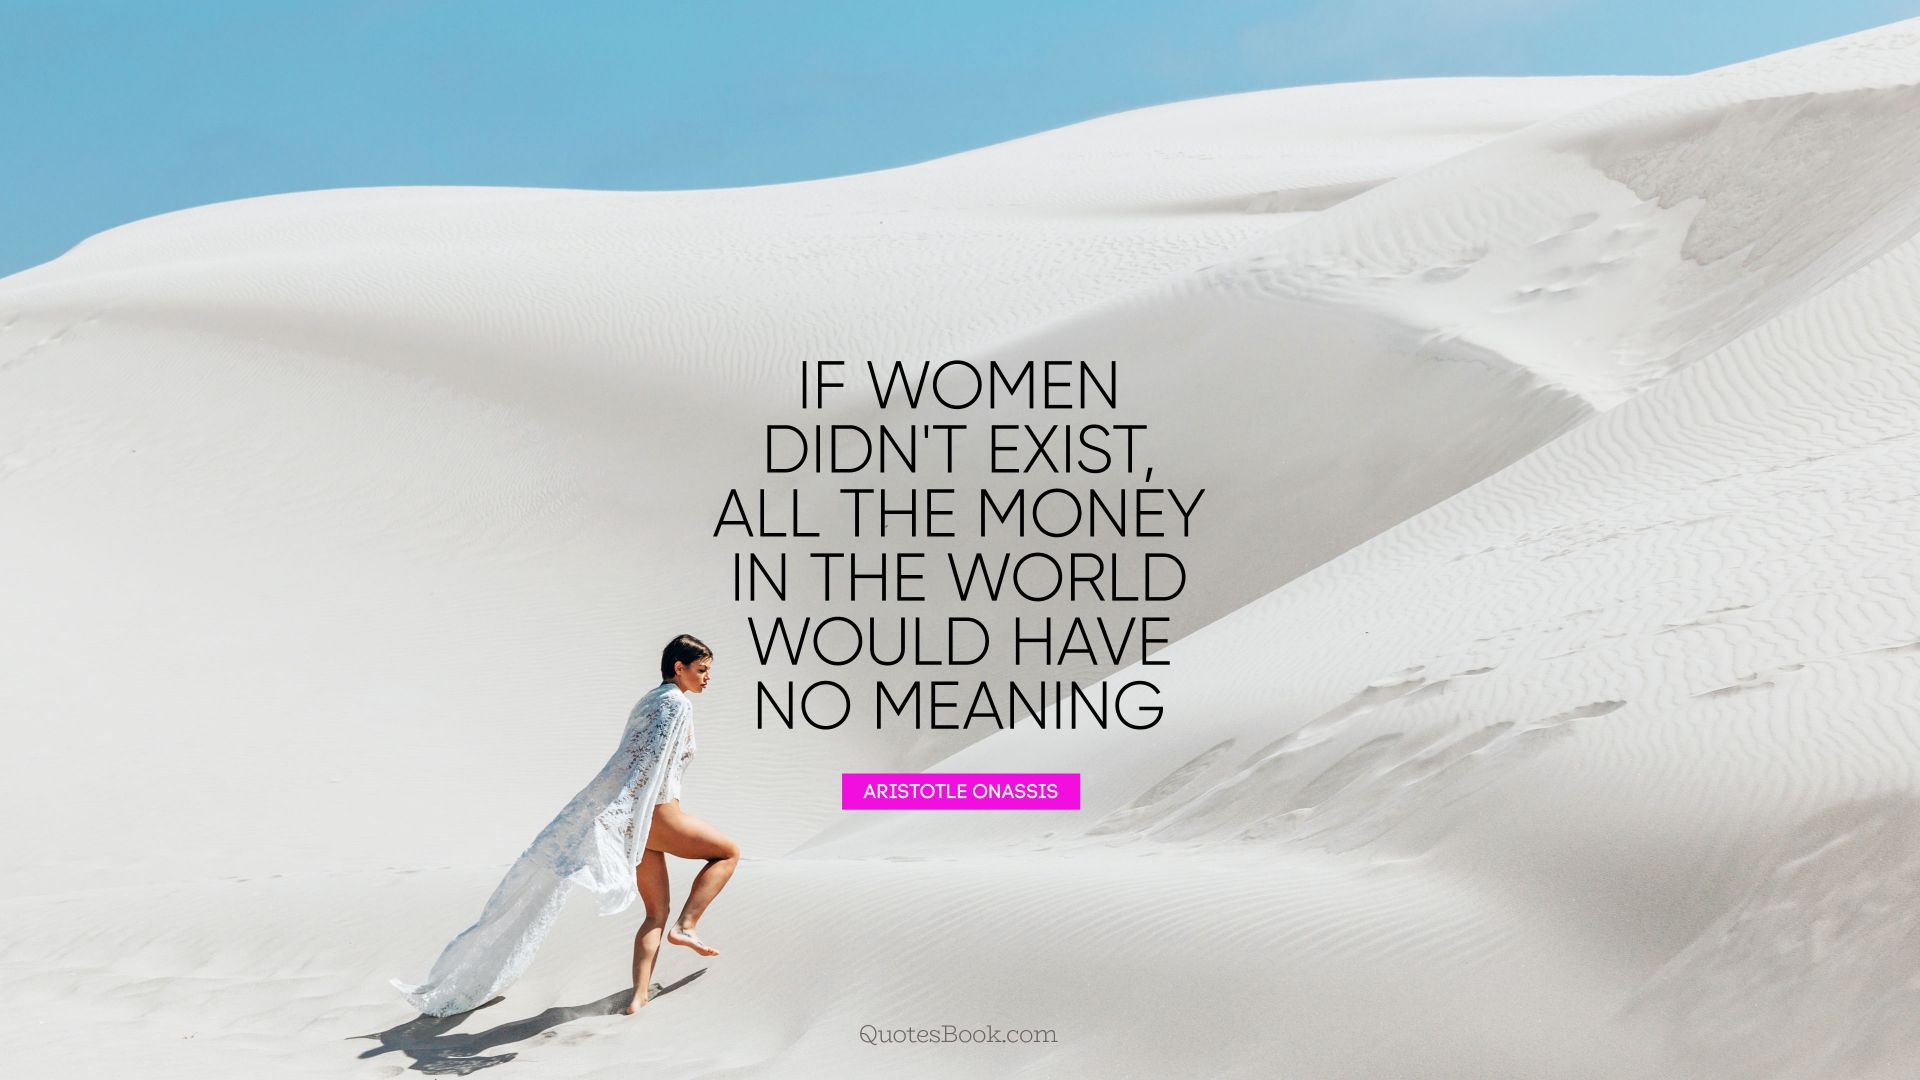 If women didn't exist, all the money in the world would have no meaning. - Quote by Aristotle Onassis